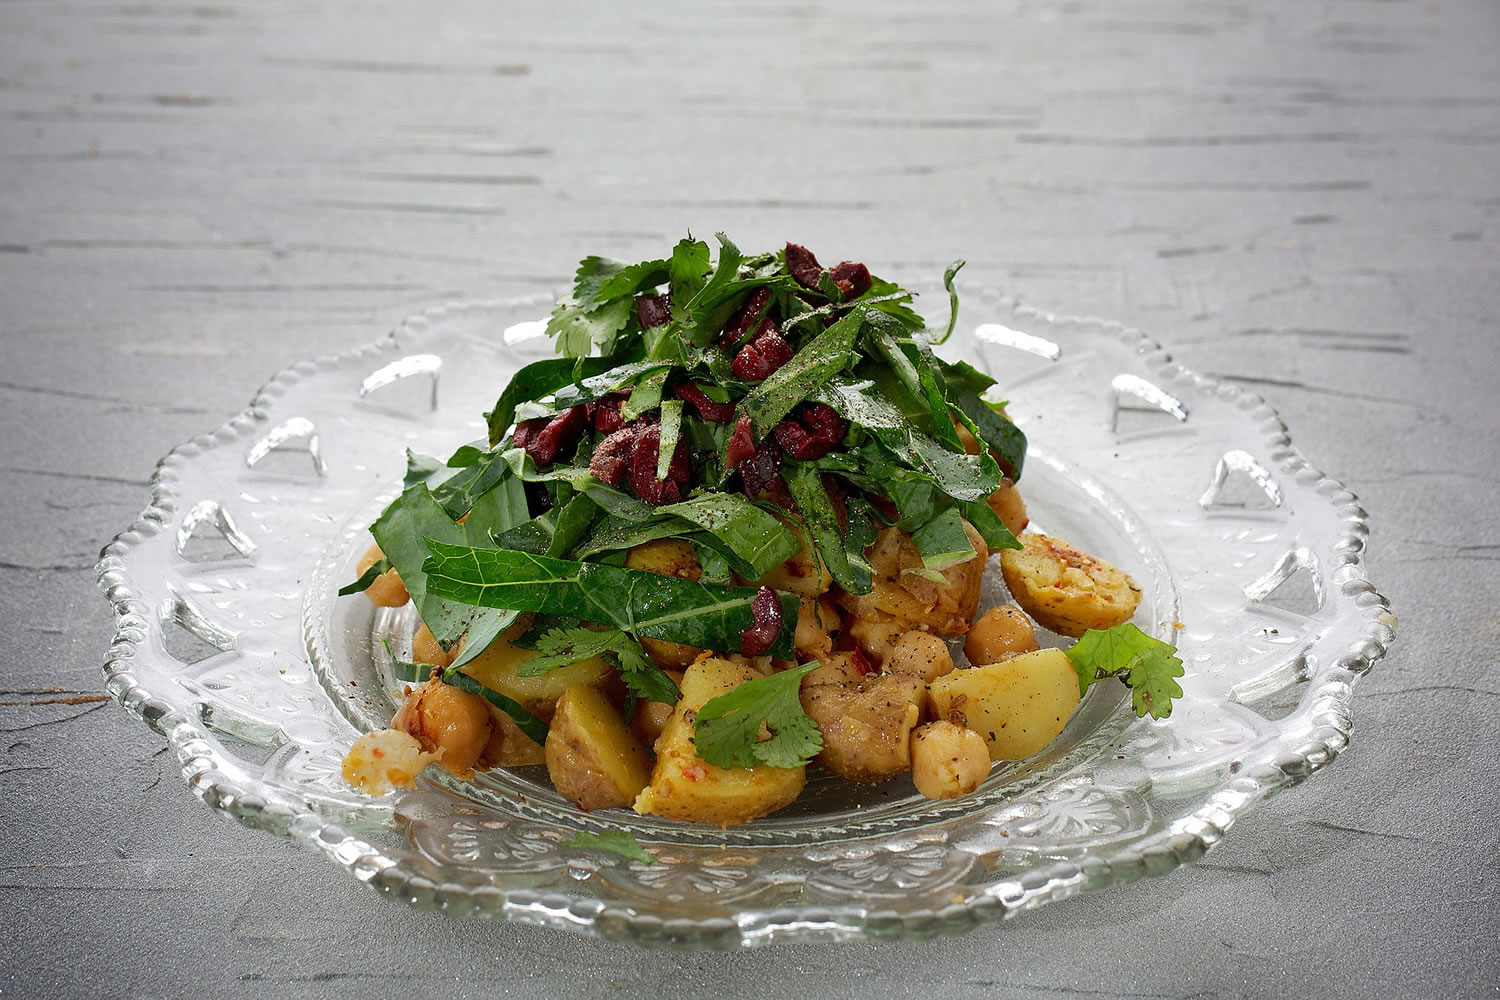 Collard Green, Potato and Chickpea Salad With Spiced Lemon Dressing.